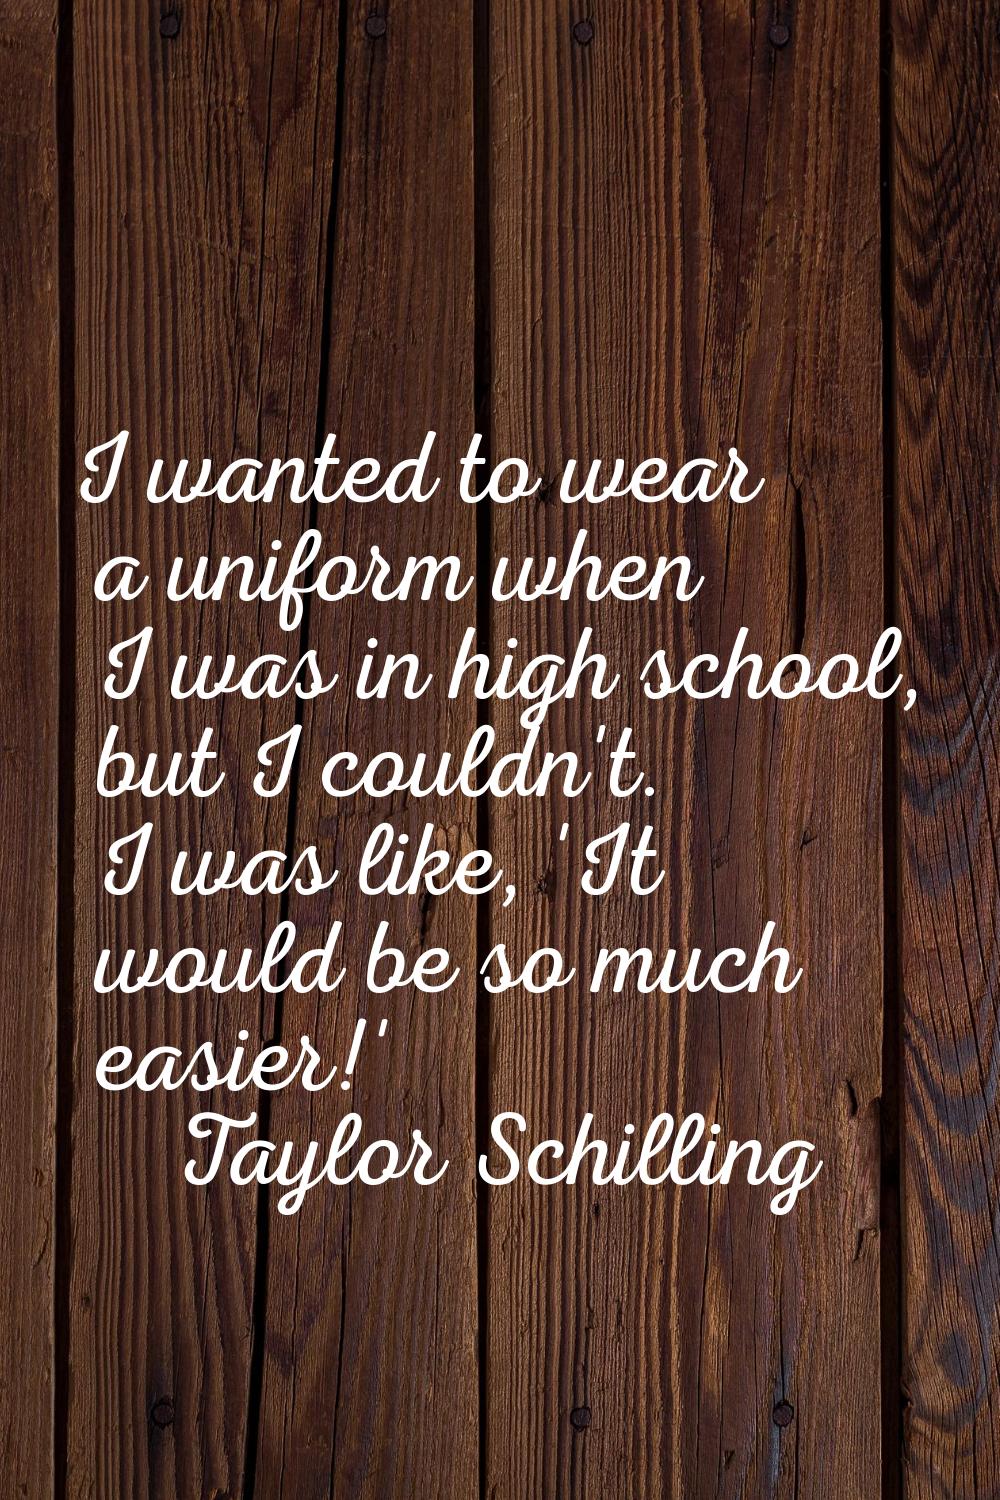 I wanted to wear a uniform when I was in high school, but I couldn't. I was like, 'It would be so m